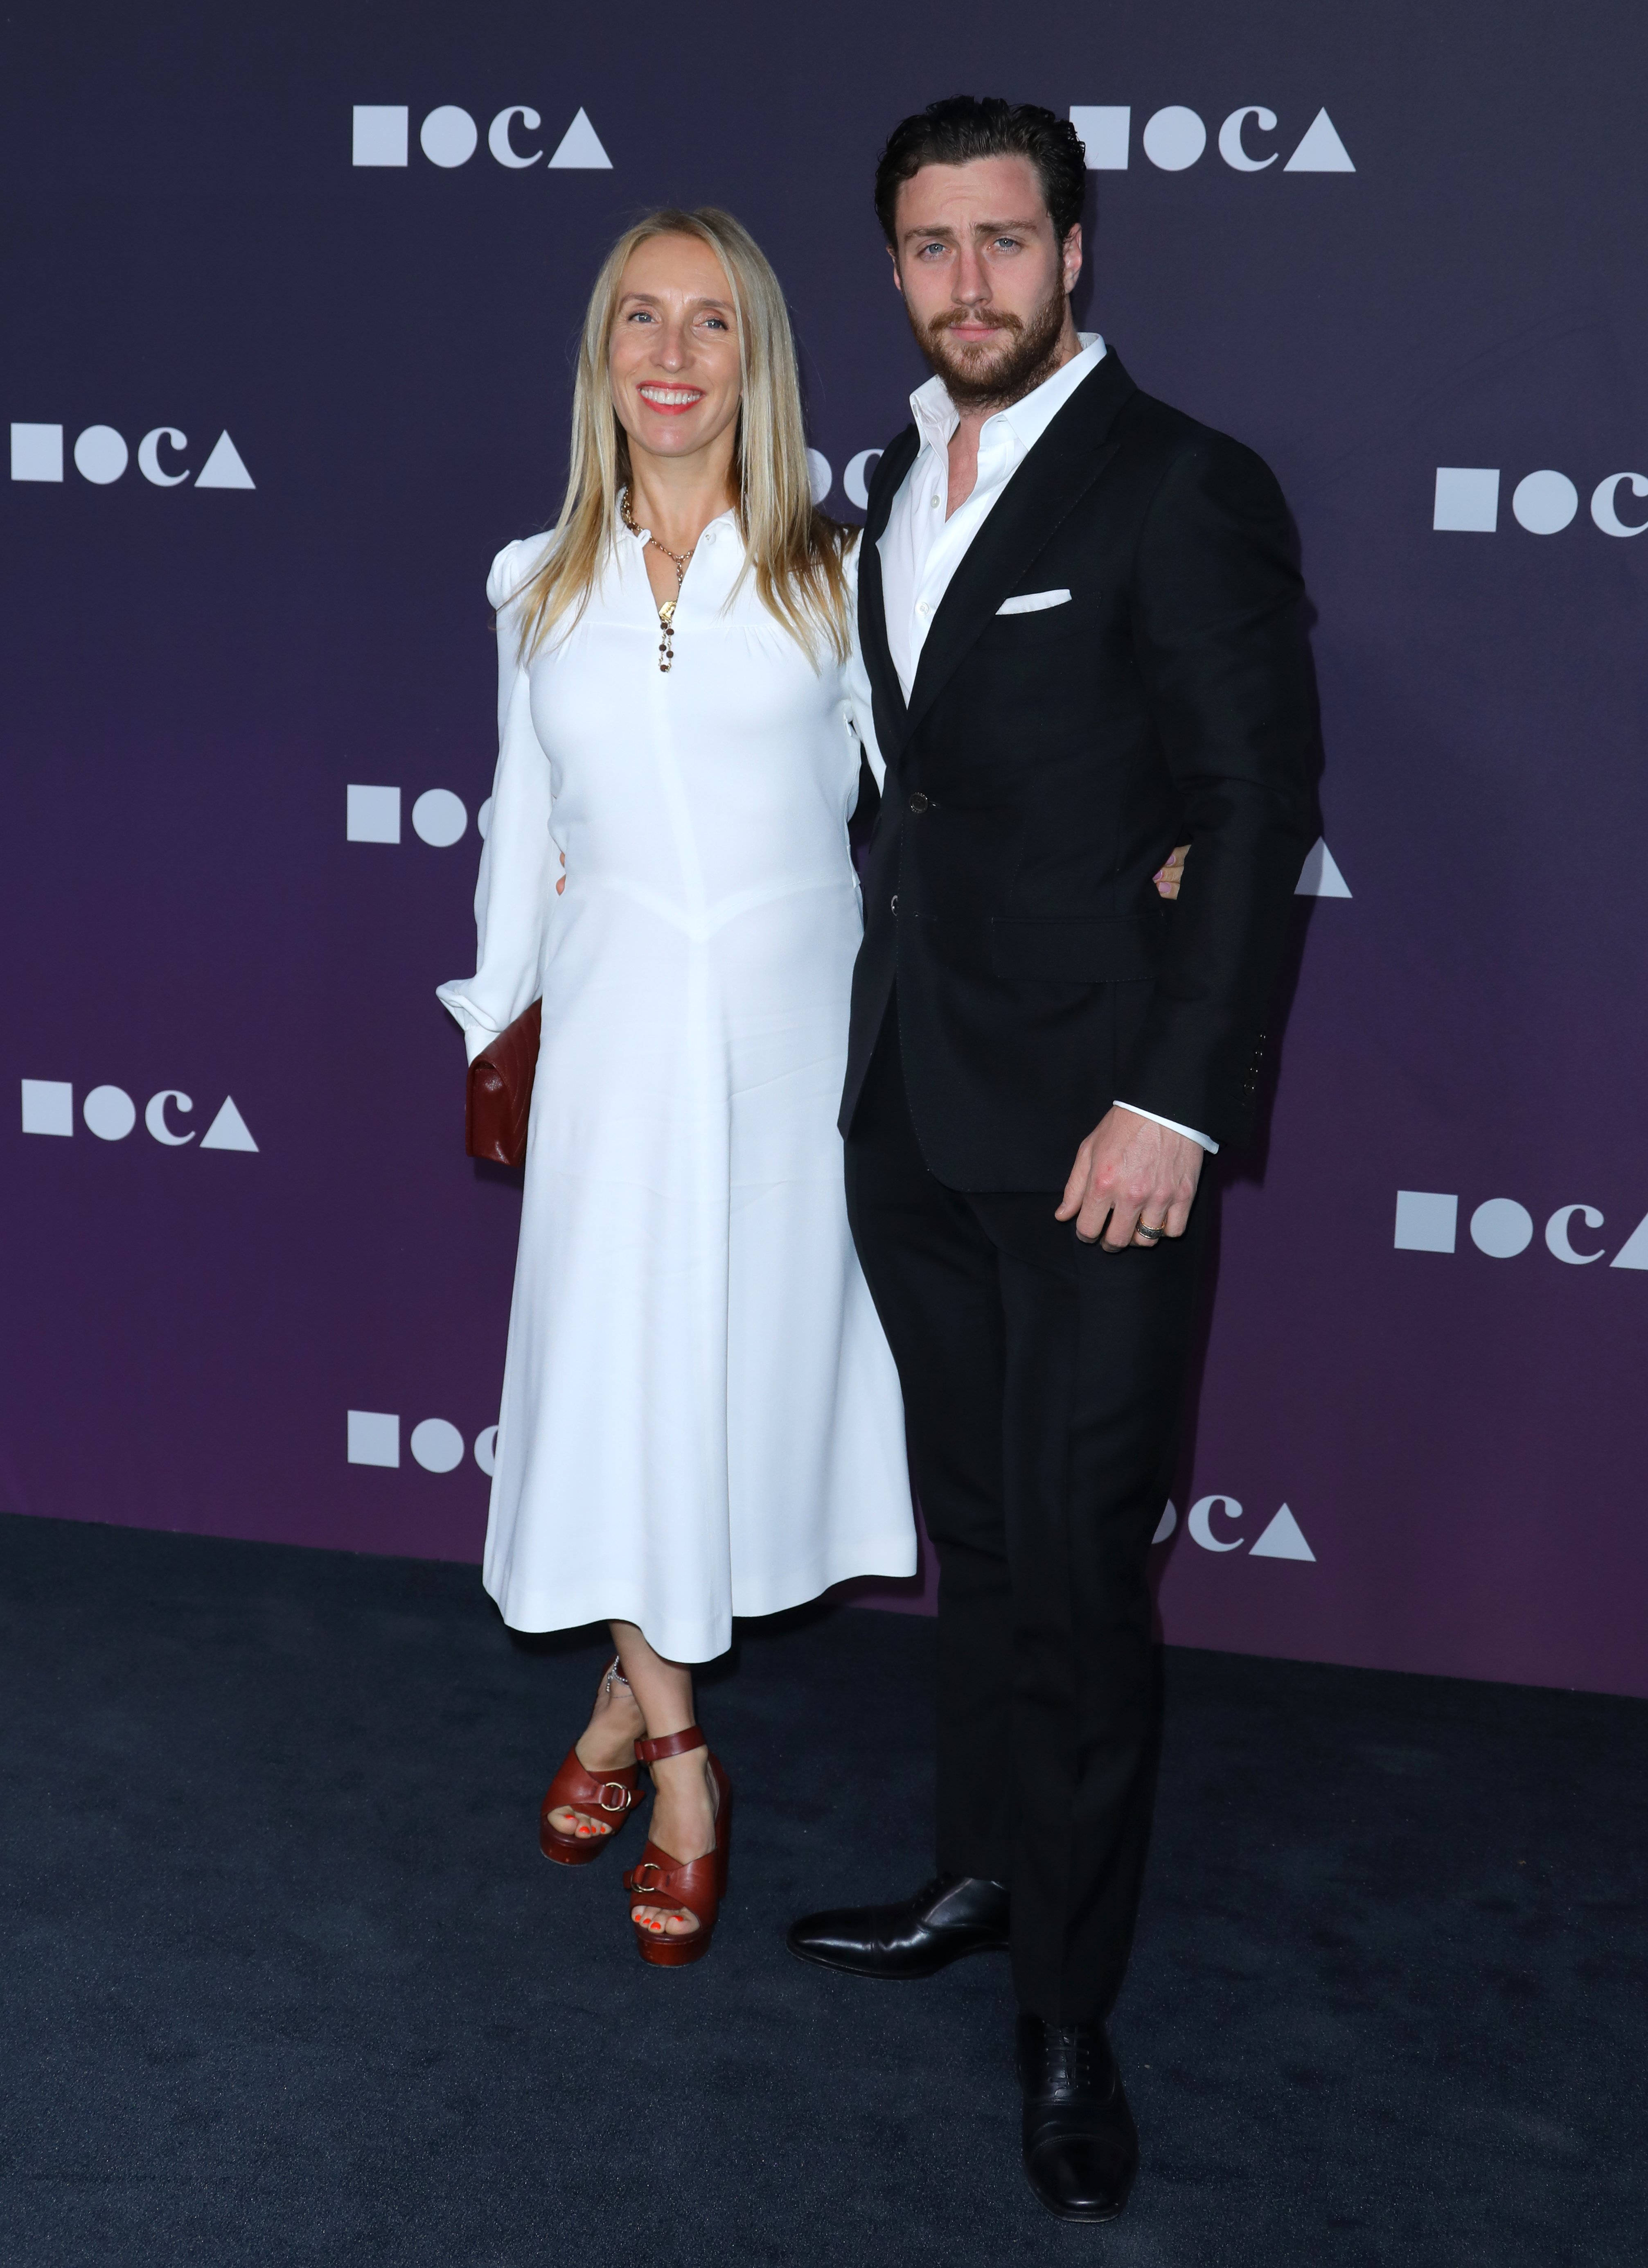 Sam Taylor-Johnson and Aaron Taylor-Johnson attend the MOCA Benefit 2019 at The Geffen Contemporary at MOCA on May 18, 2019 in Los Angeles, California. | Source: Getty Images